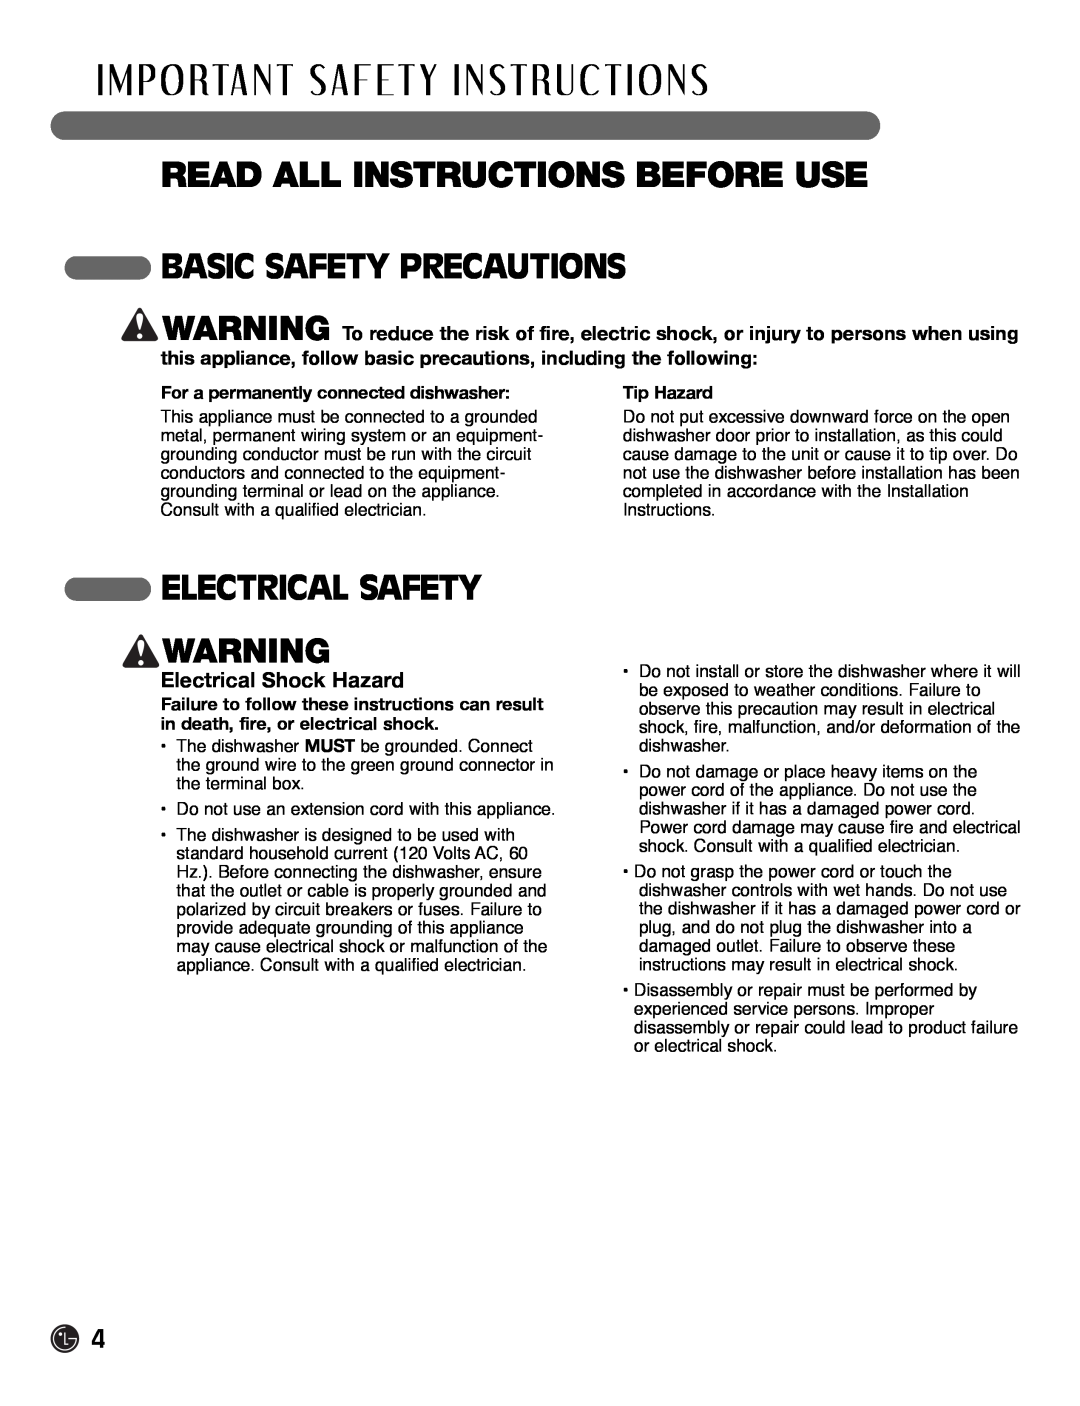 LG Electronics LDF7932BB Electrical Safety, Electrical Shock Hazard, Read All Instructions Before Use, Tip Hazard 